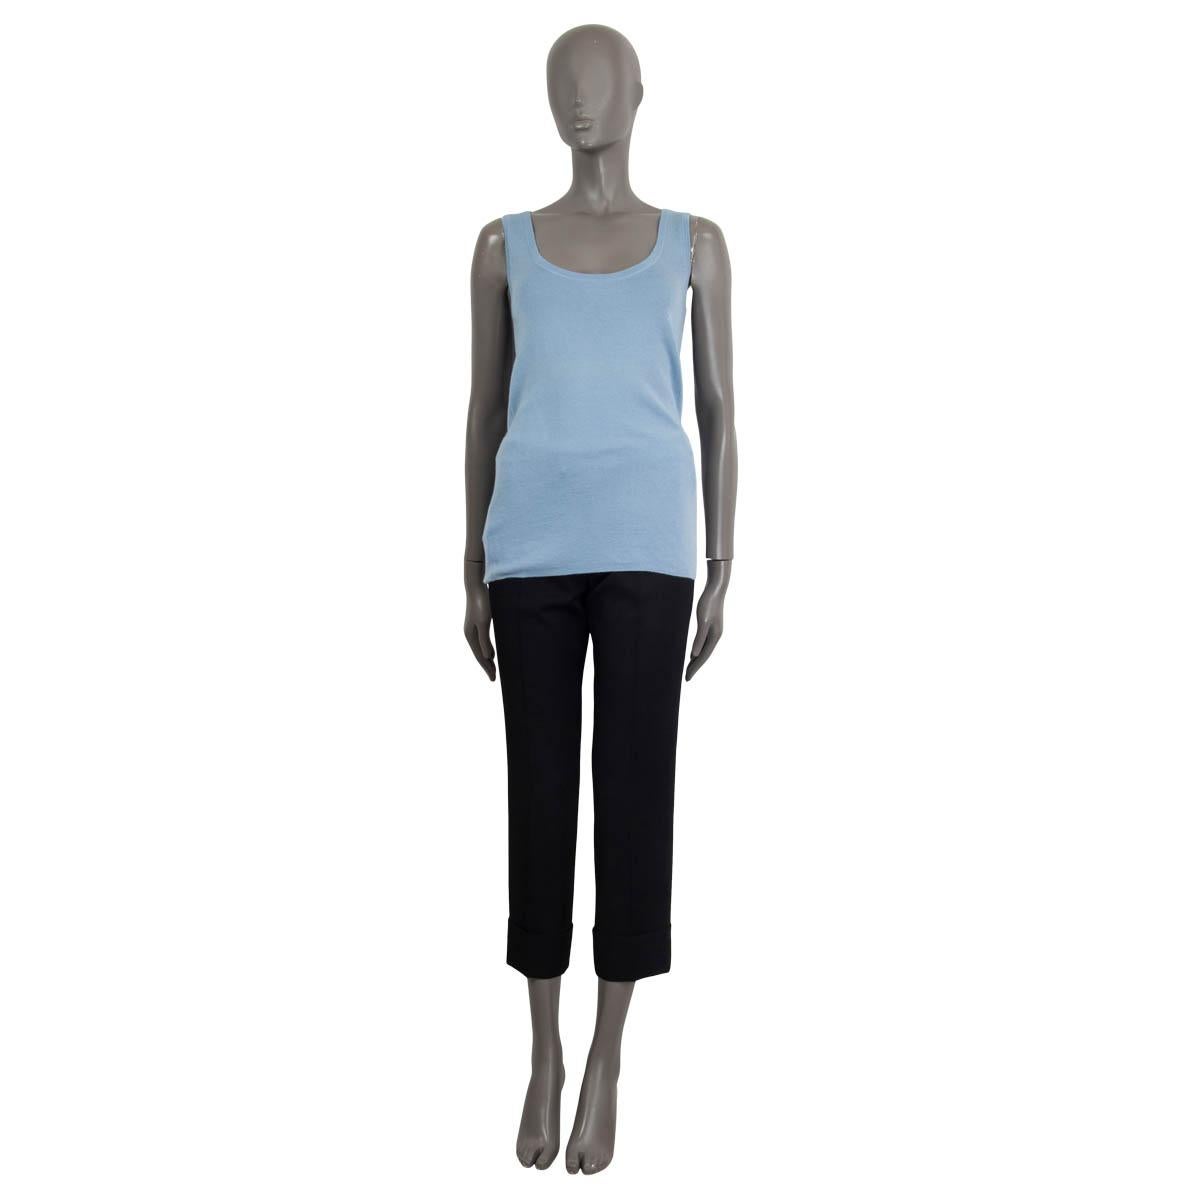 100% authentic Prada sleeveless top in light blue cashmere (70%) and silk (30%). Comes with a round neck. Unlined. Has a pulled thread on the front otherwise in excellent condition. Matching cardigan available in separate listing.

Measurements
Tag